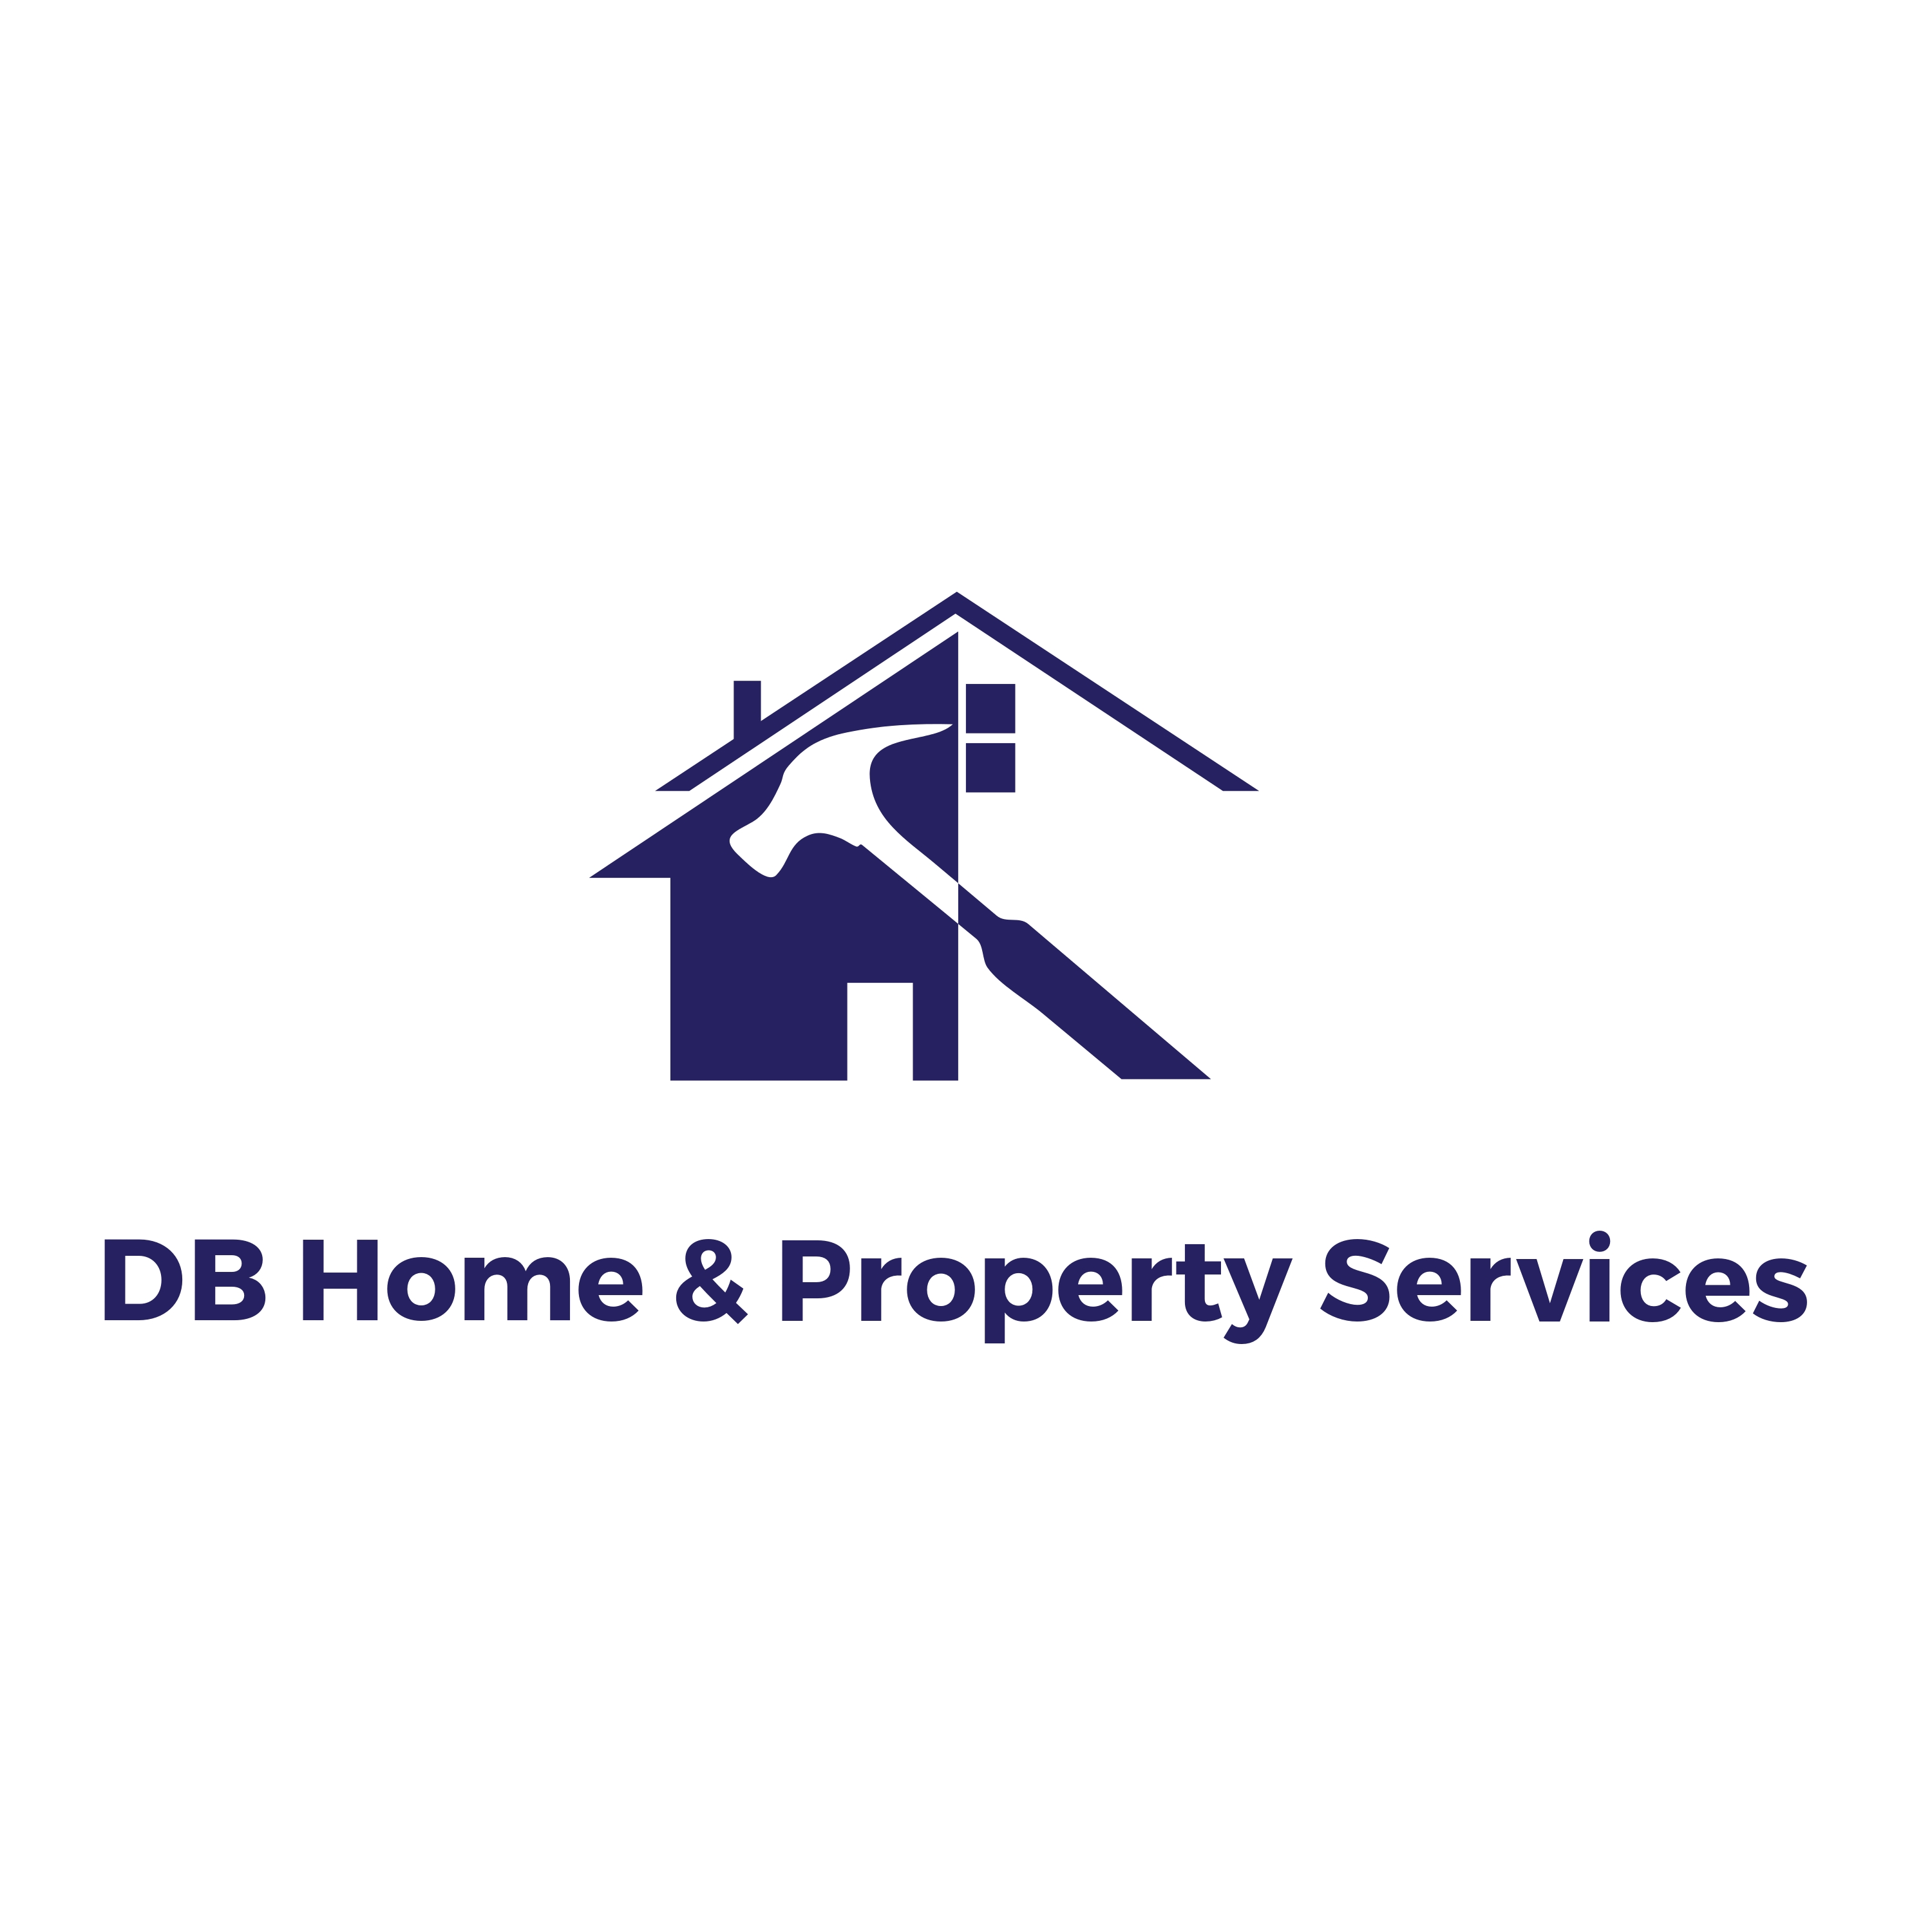 DB Home & Property Services Logo